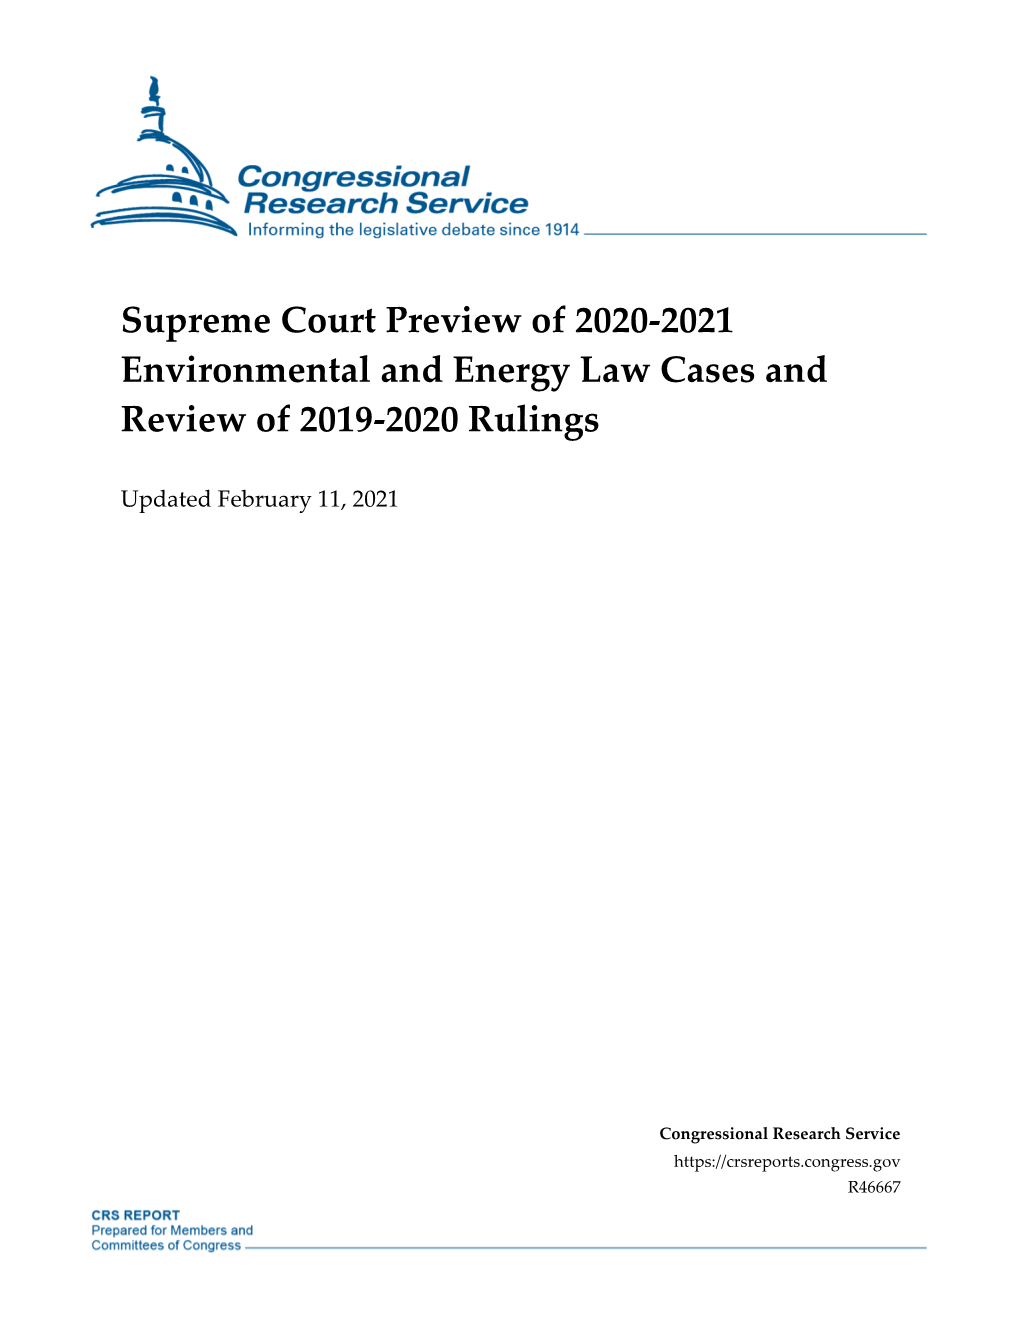 Supreme Court Preview of 2020-2021 Environmental and Energy Law Cases and Review of 2019-2020 Rulings